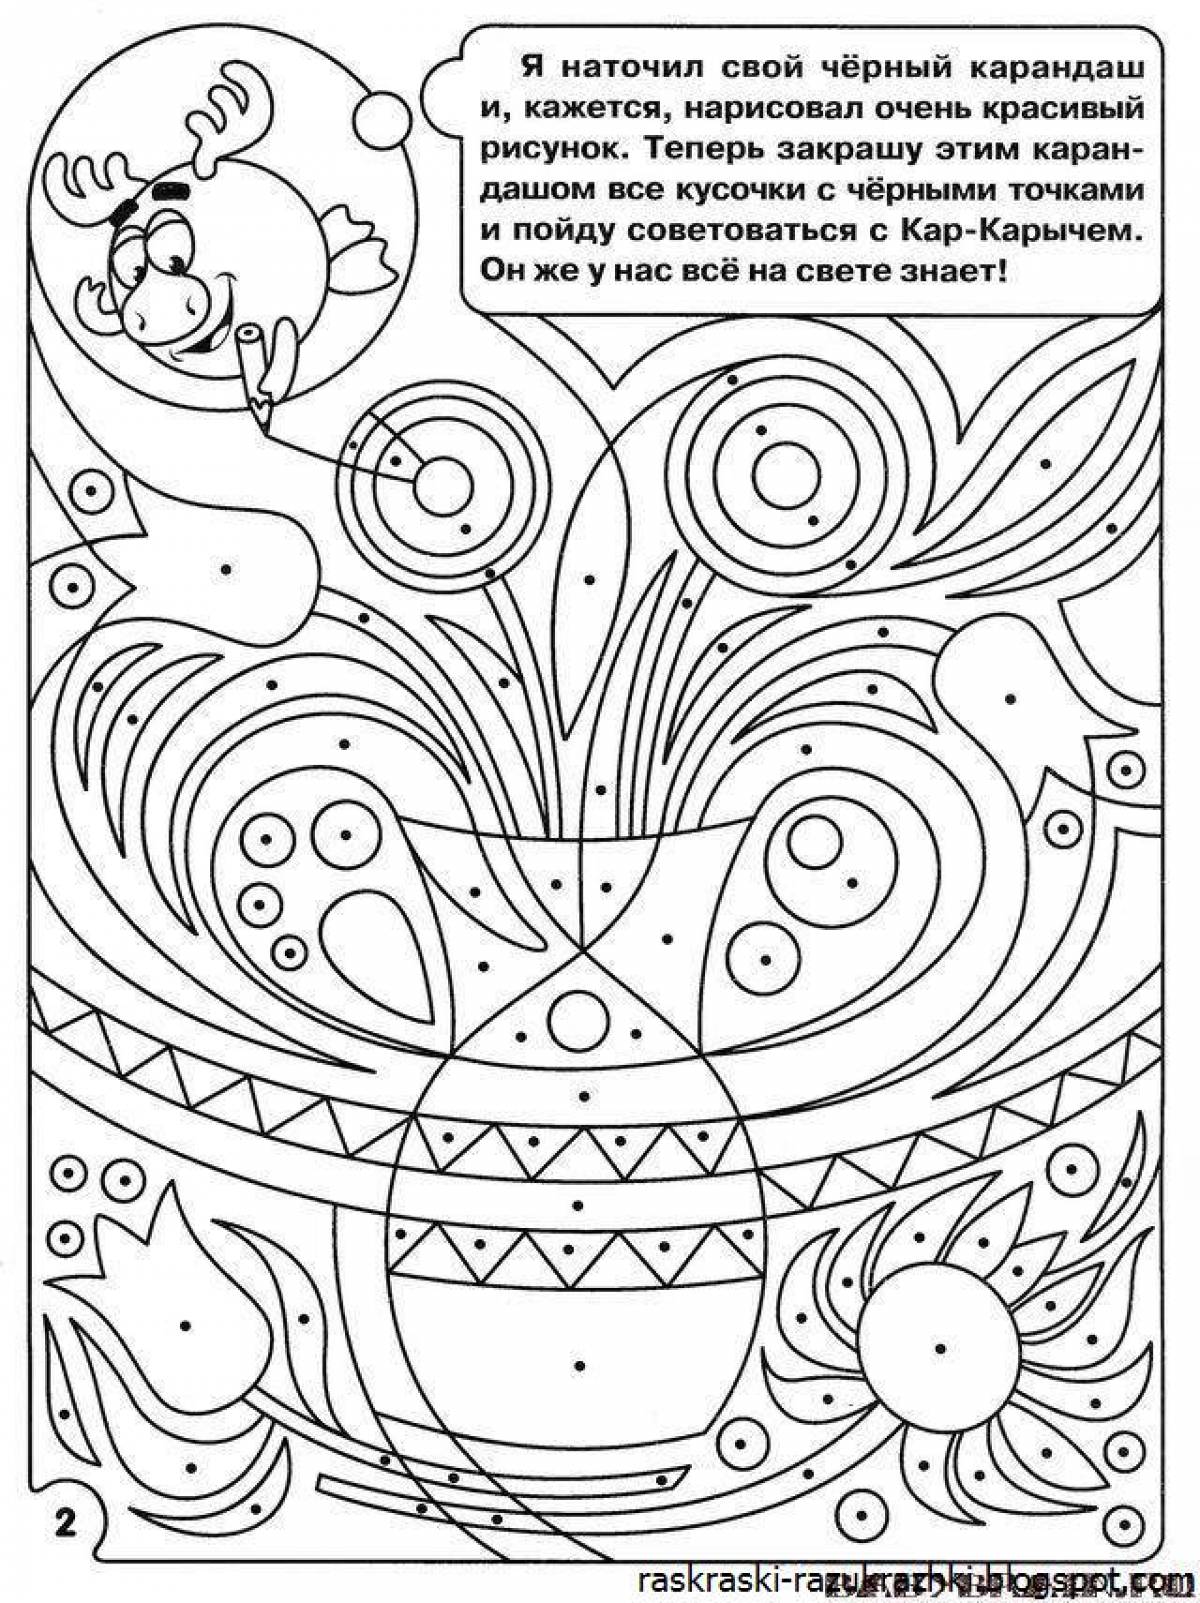 Inspirational coloring book for 6-7 year olds